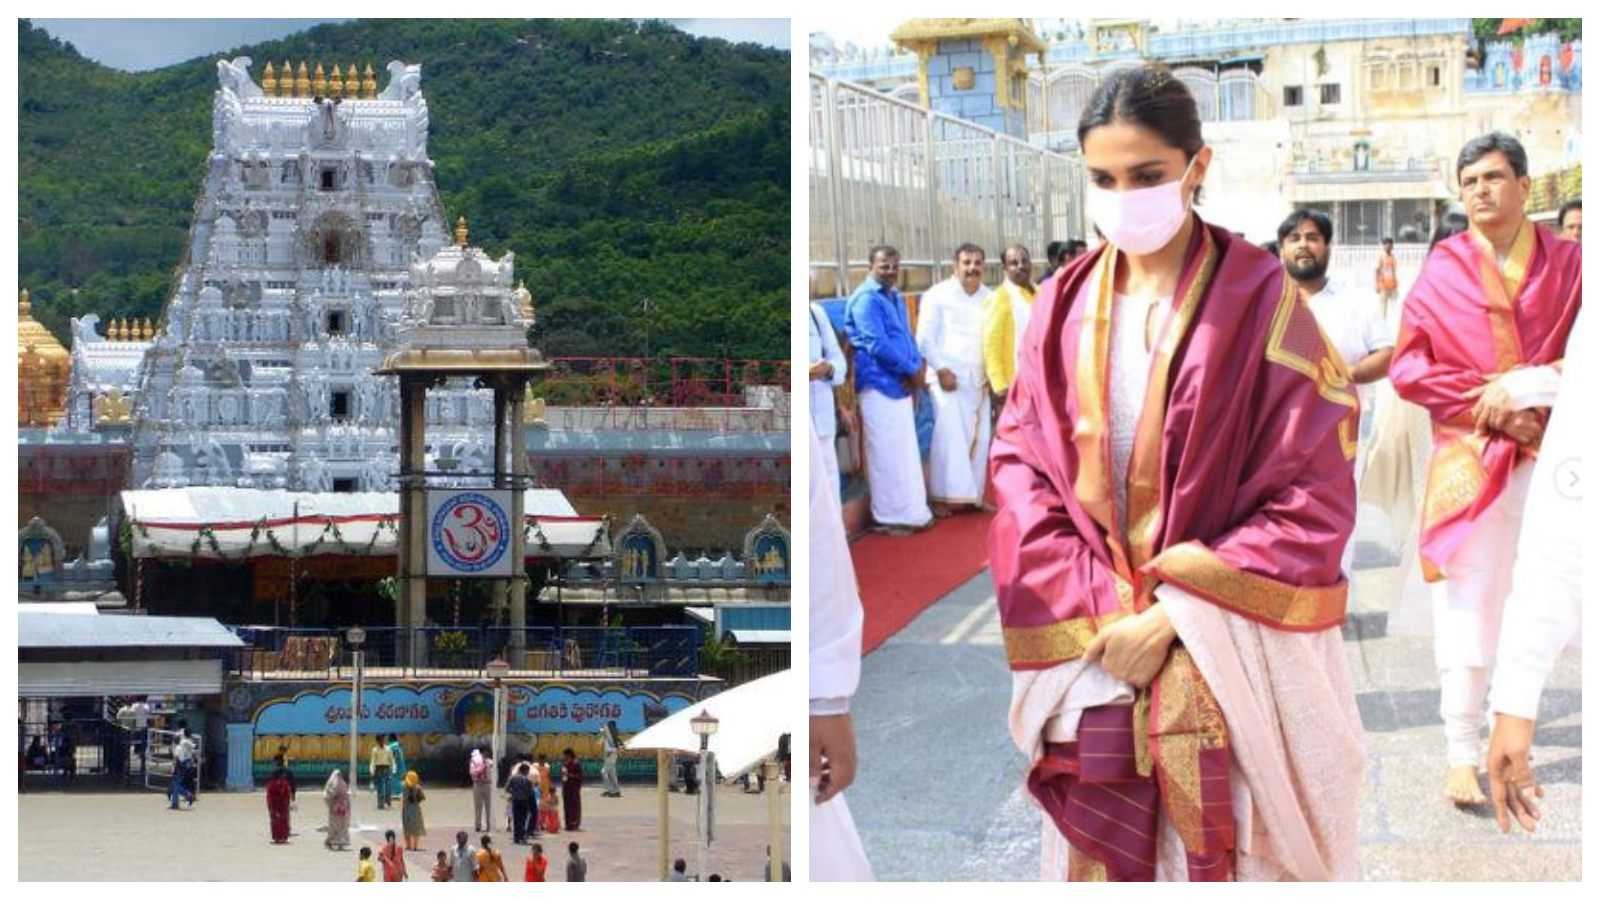 Deepika Padukone visits Tirupati with her father on his birthday before reuniting with Pathaan co-star Shah Rukh